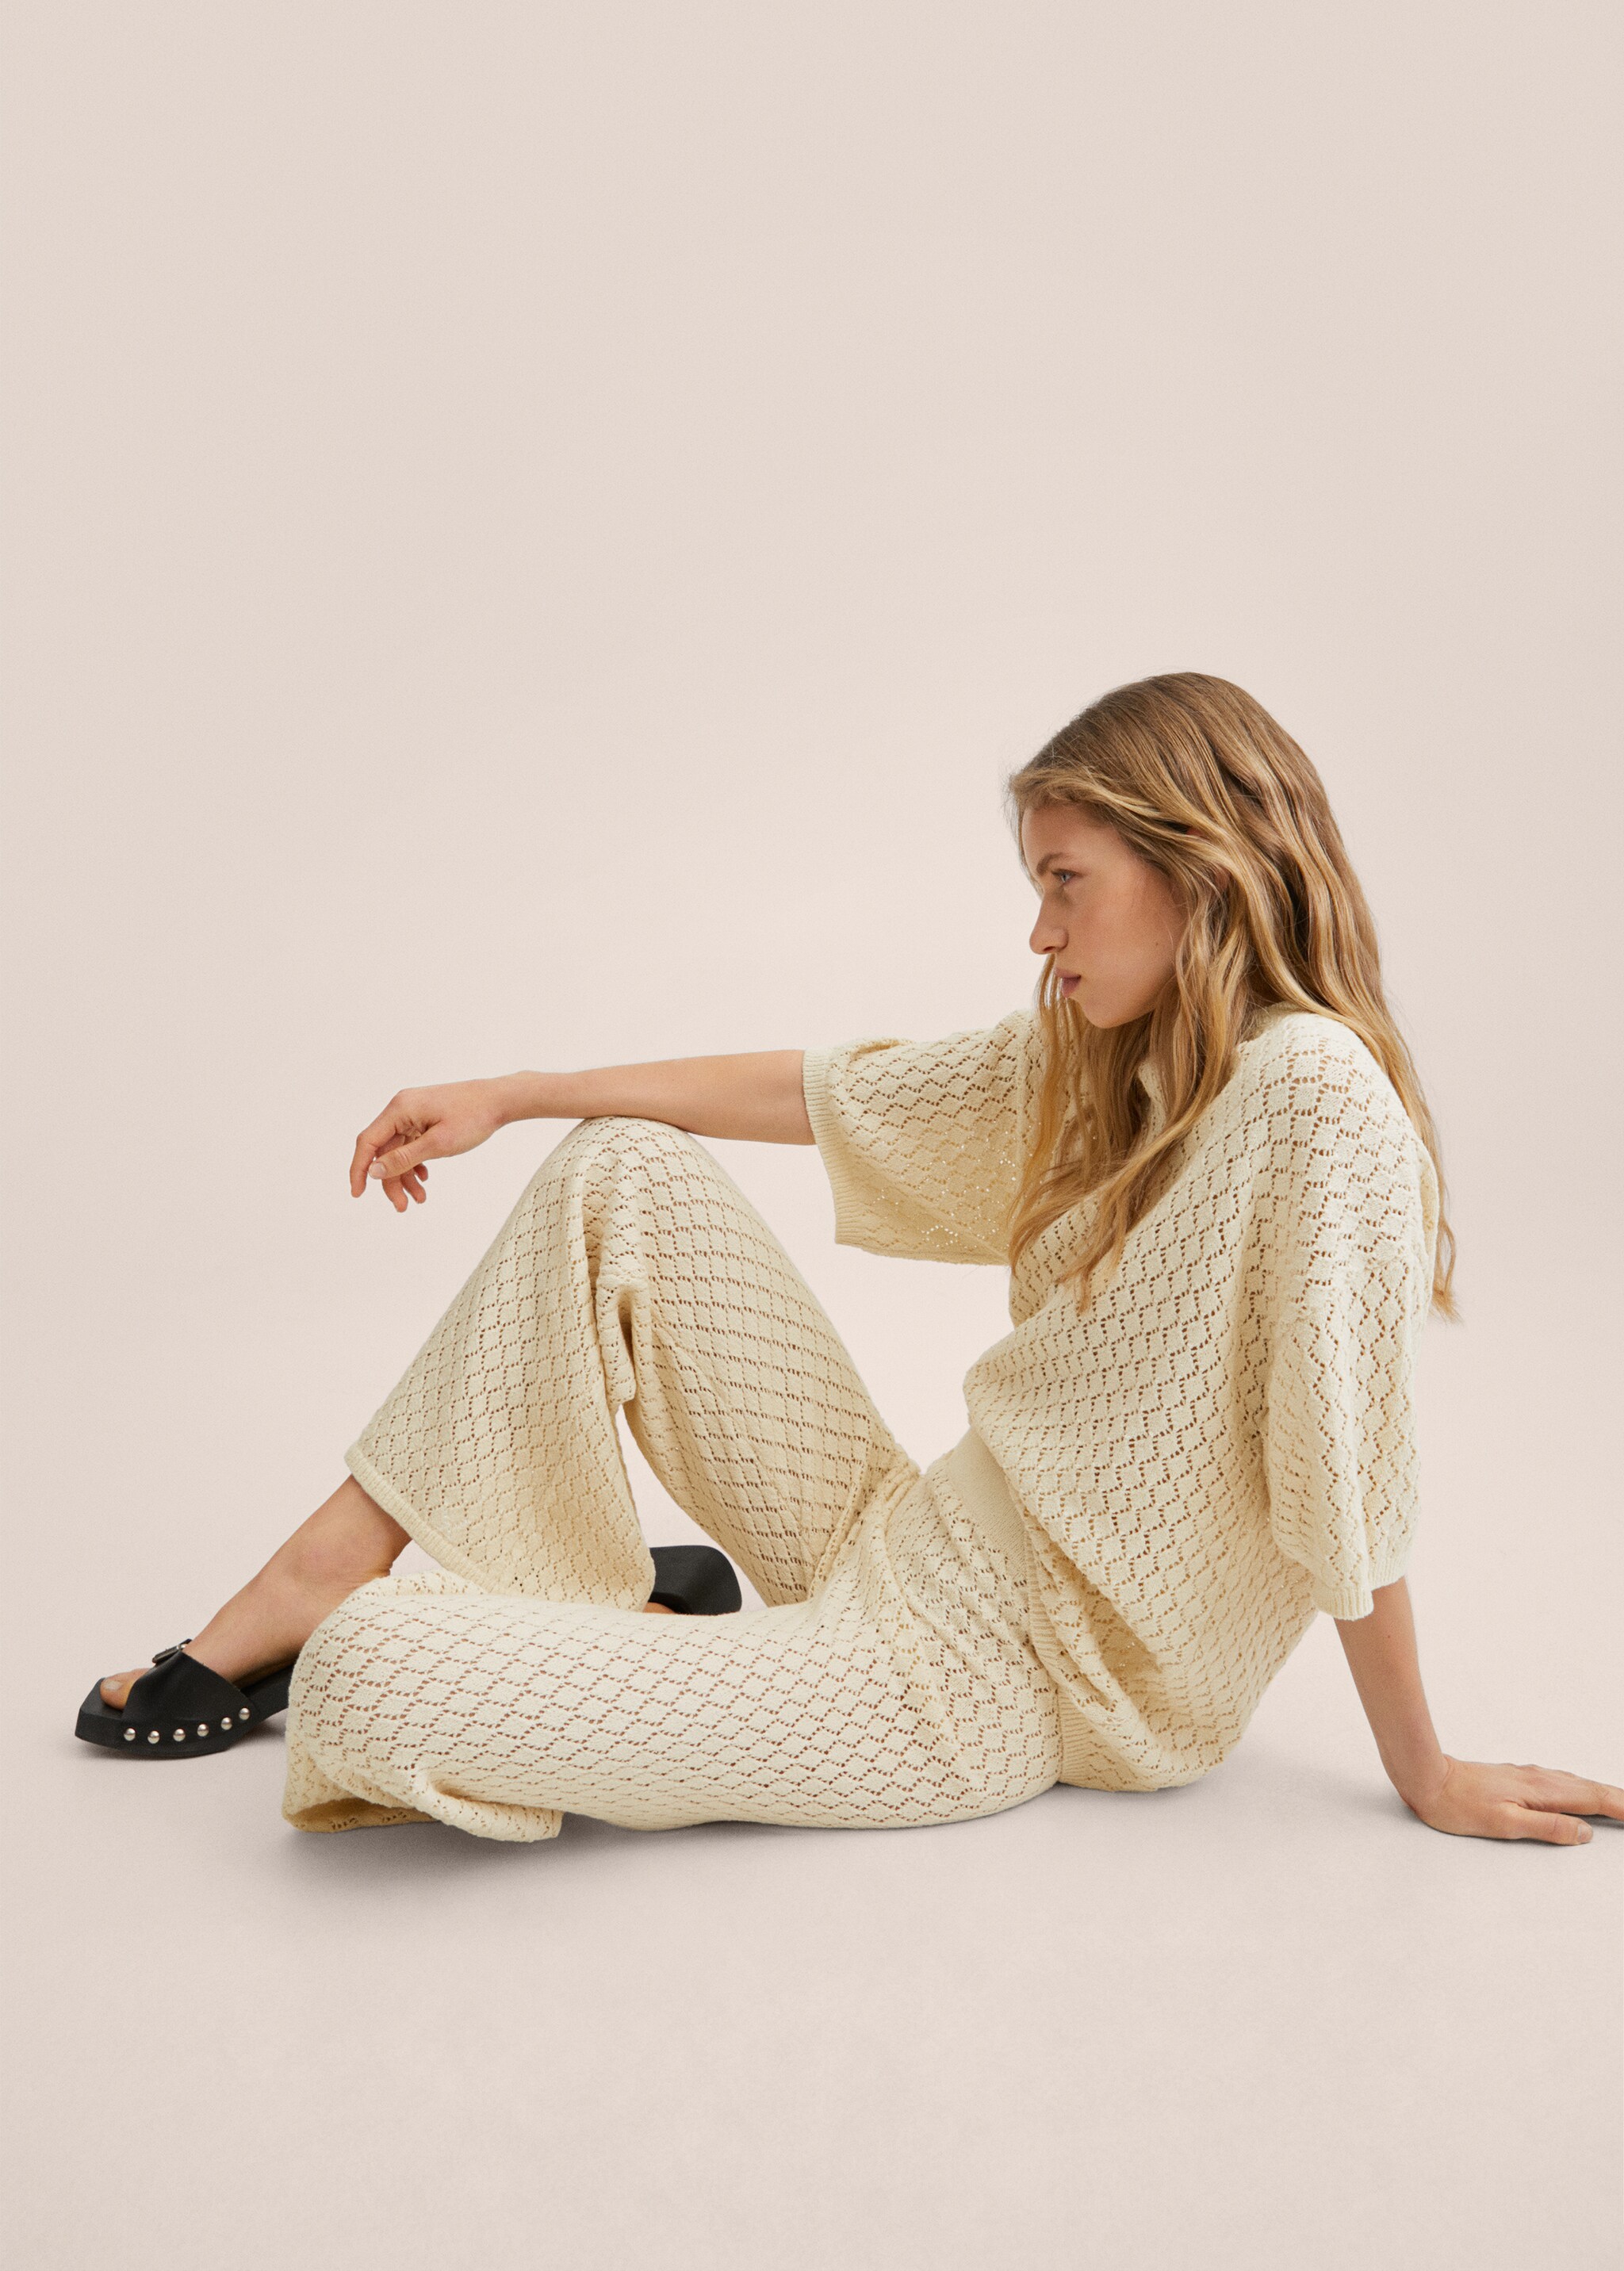 Openwork knit trousers - Details of the article 6